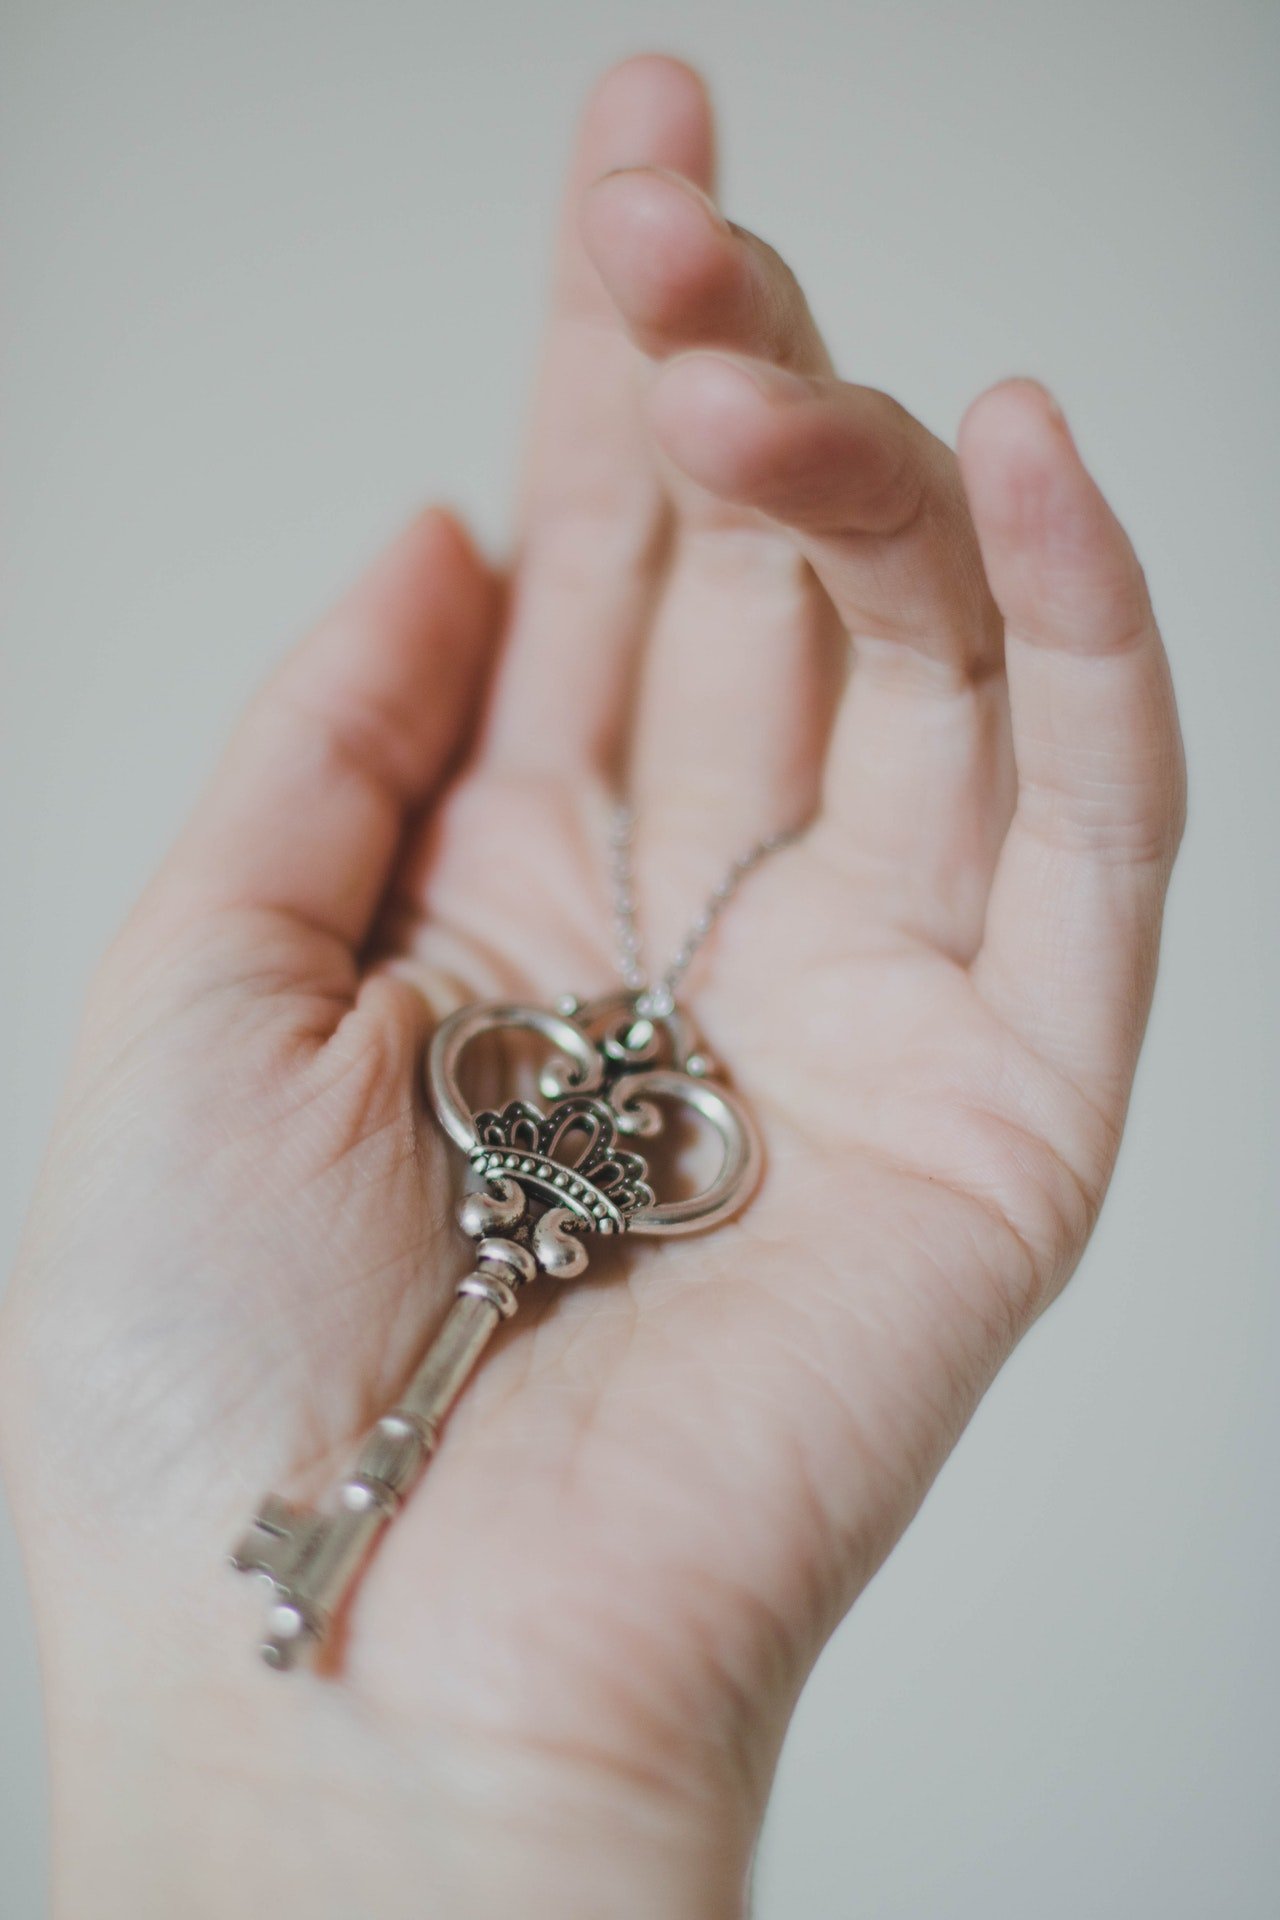 The waitress offered her a set of keys and an address the next day. | Source: Pexels